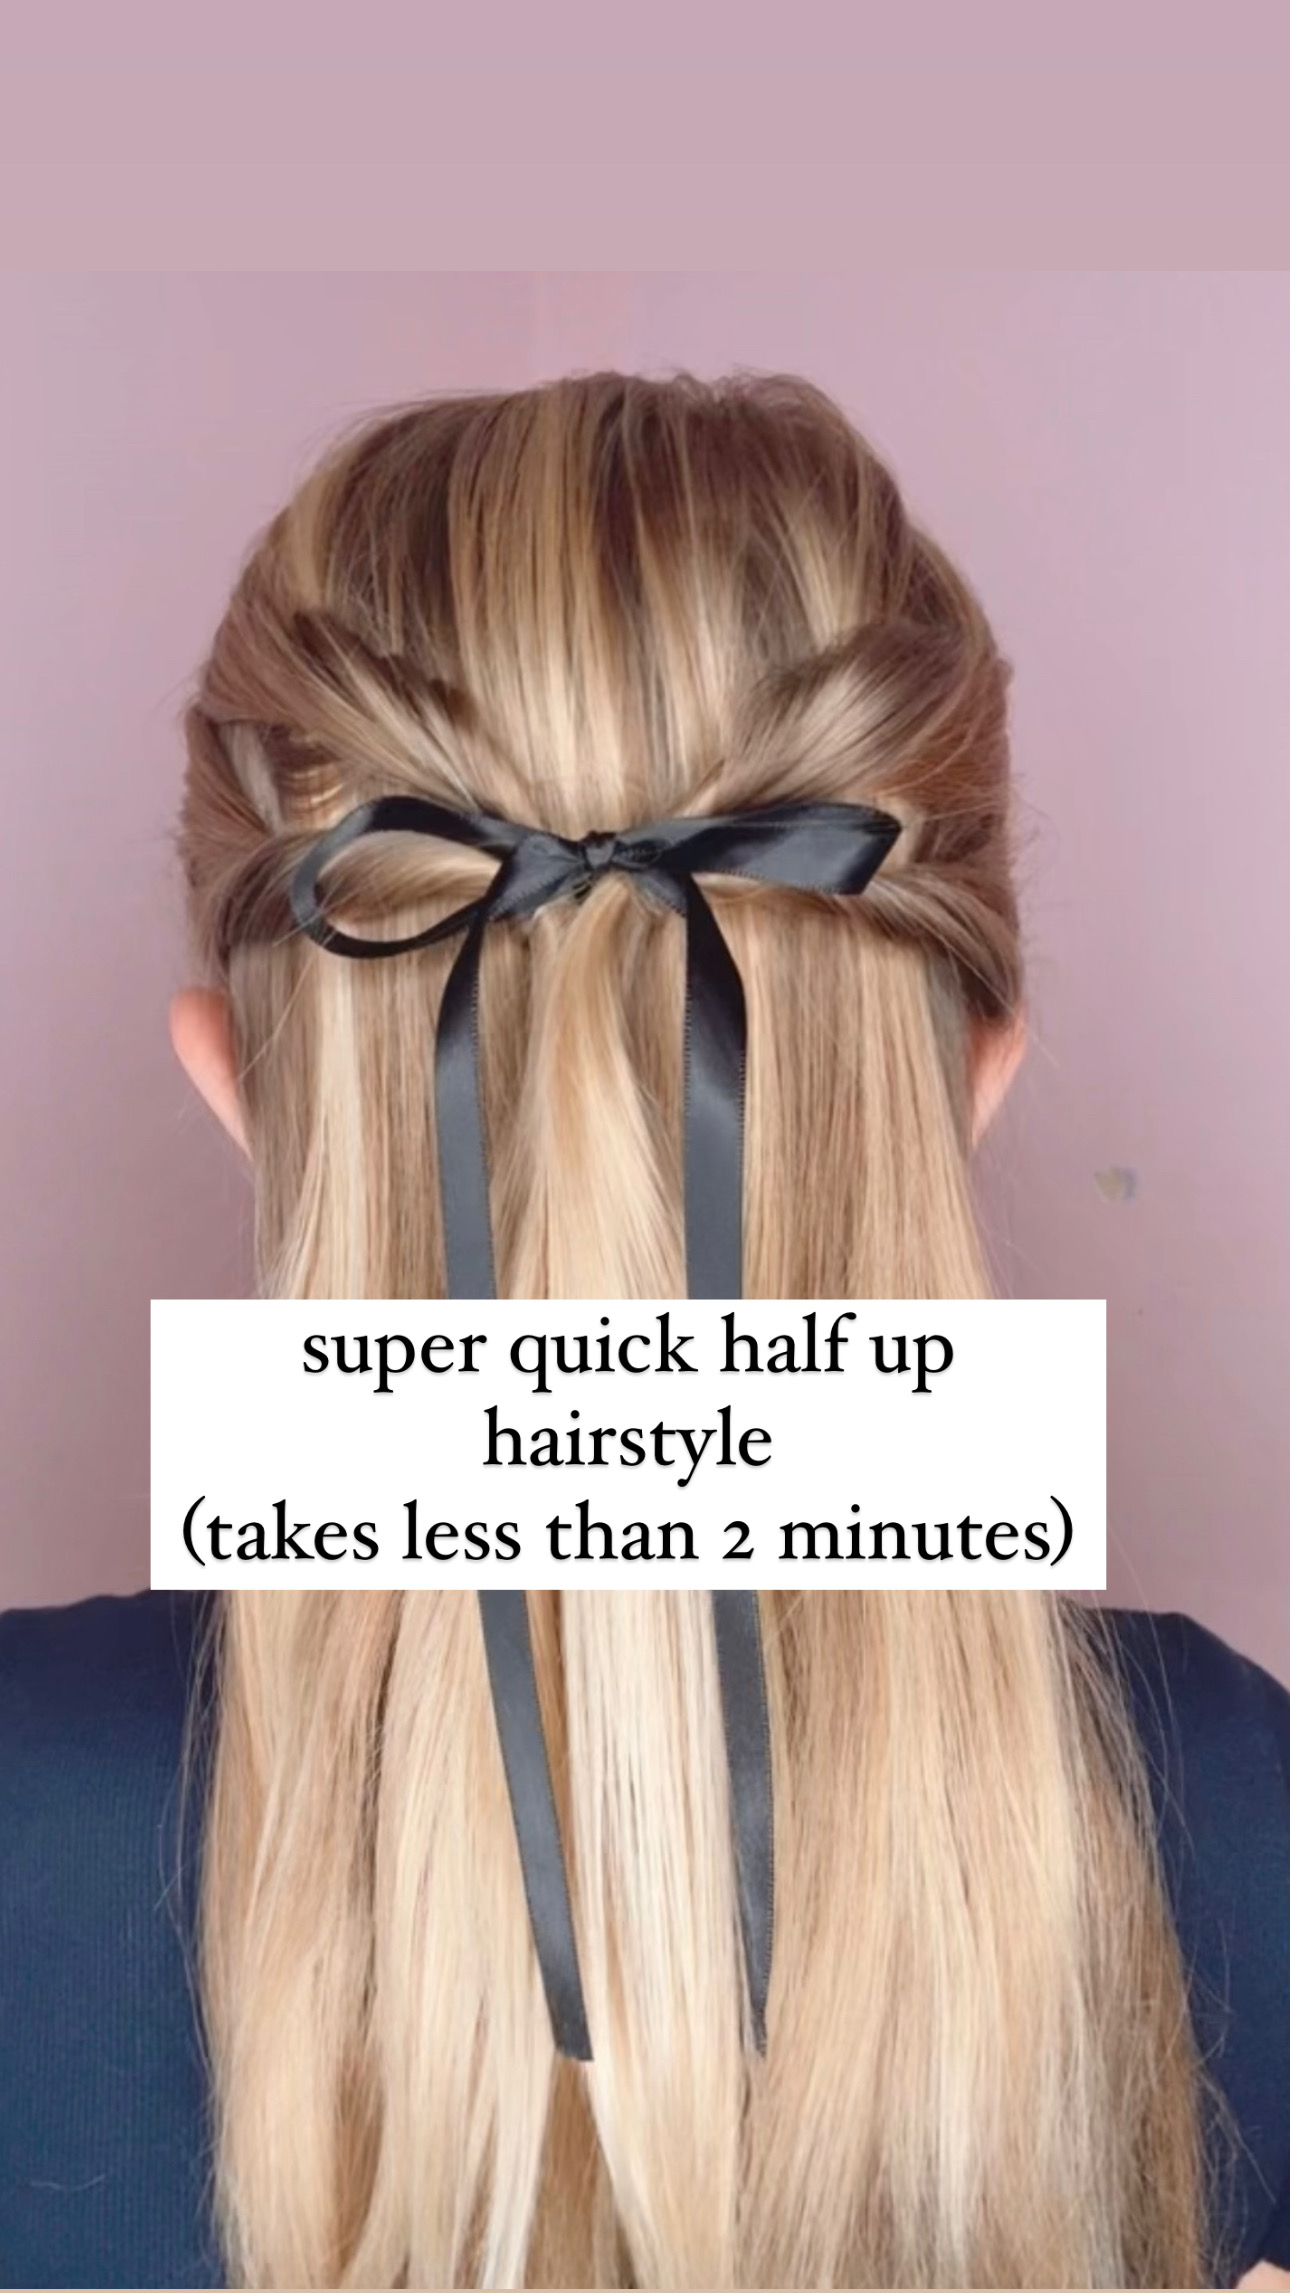 5 EASY 60 Second Half Up Hairstyles! - YouTube